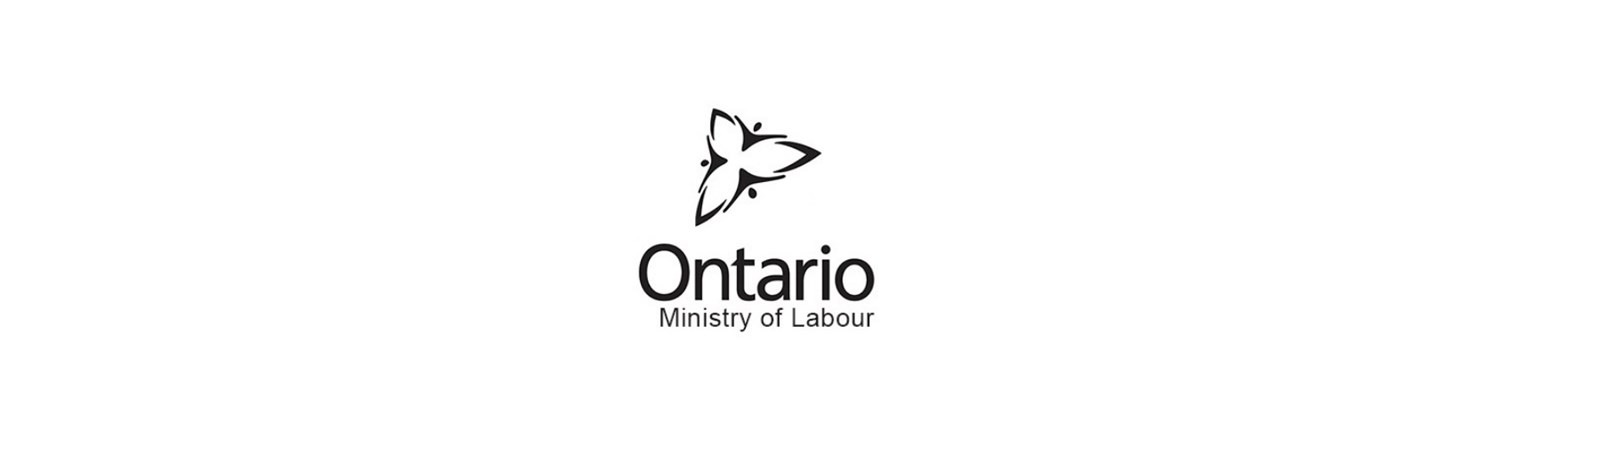 Ontario Ministry Of Labour Header